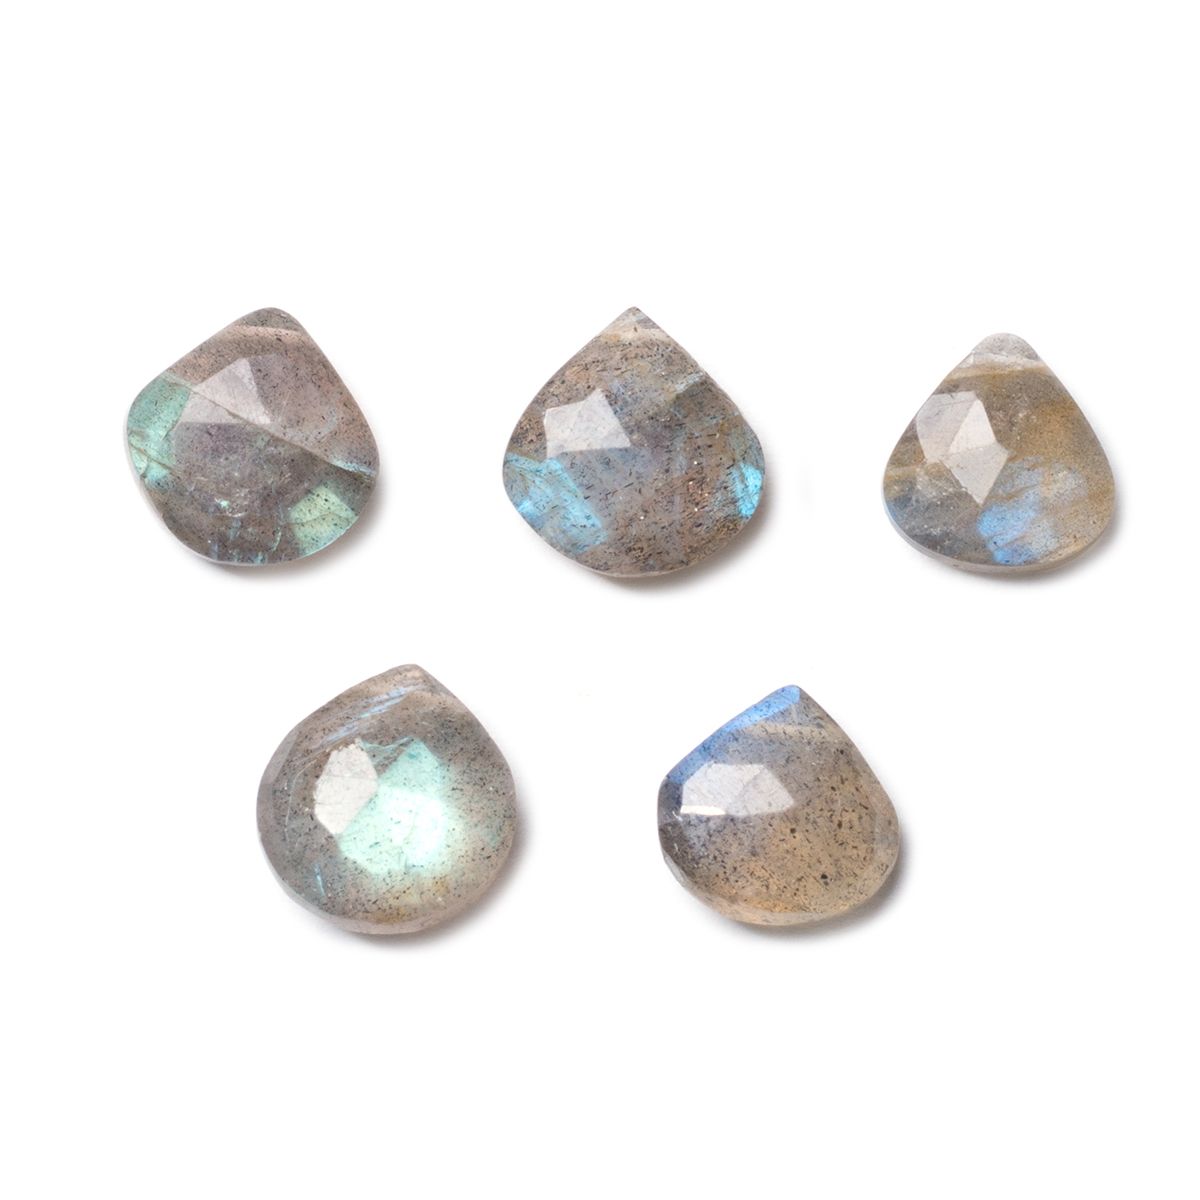 Labradorite Faceted Heart Briolette Beads - Approx From 8mm